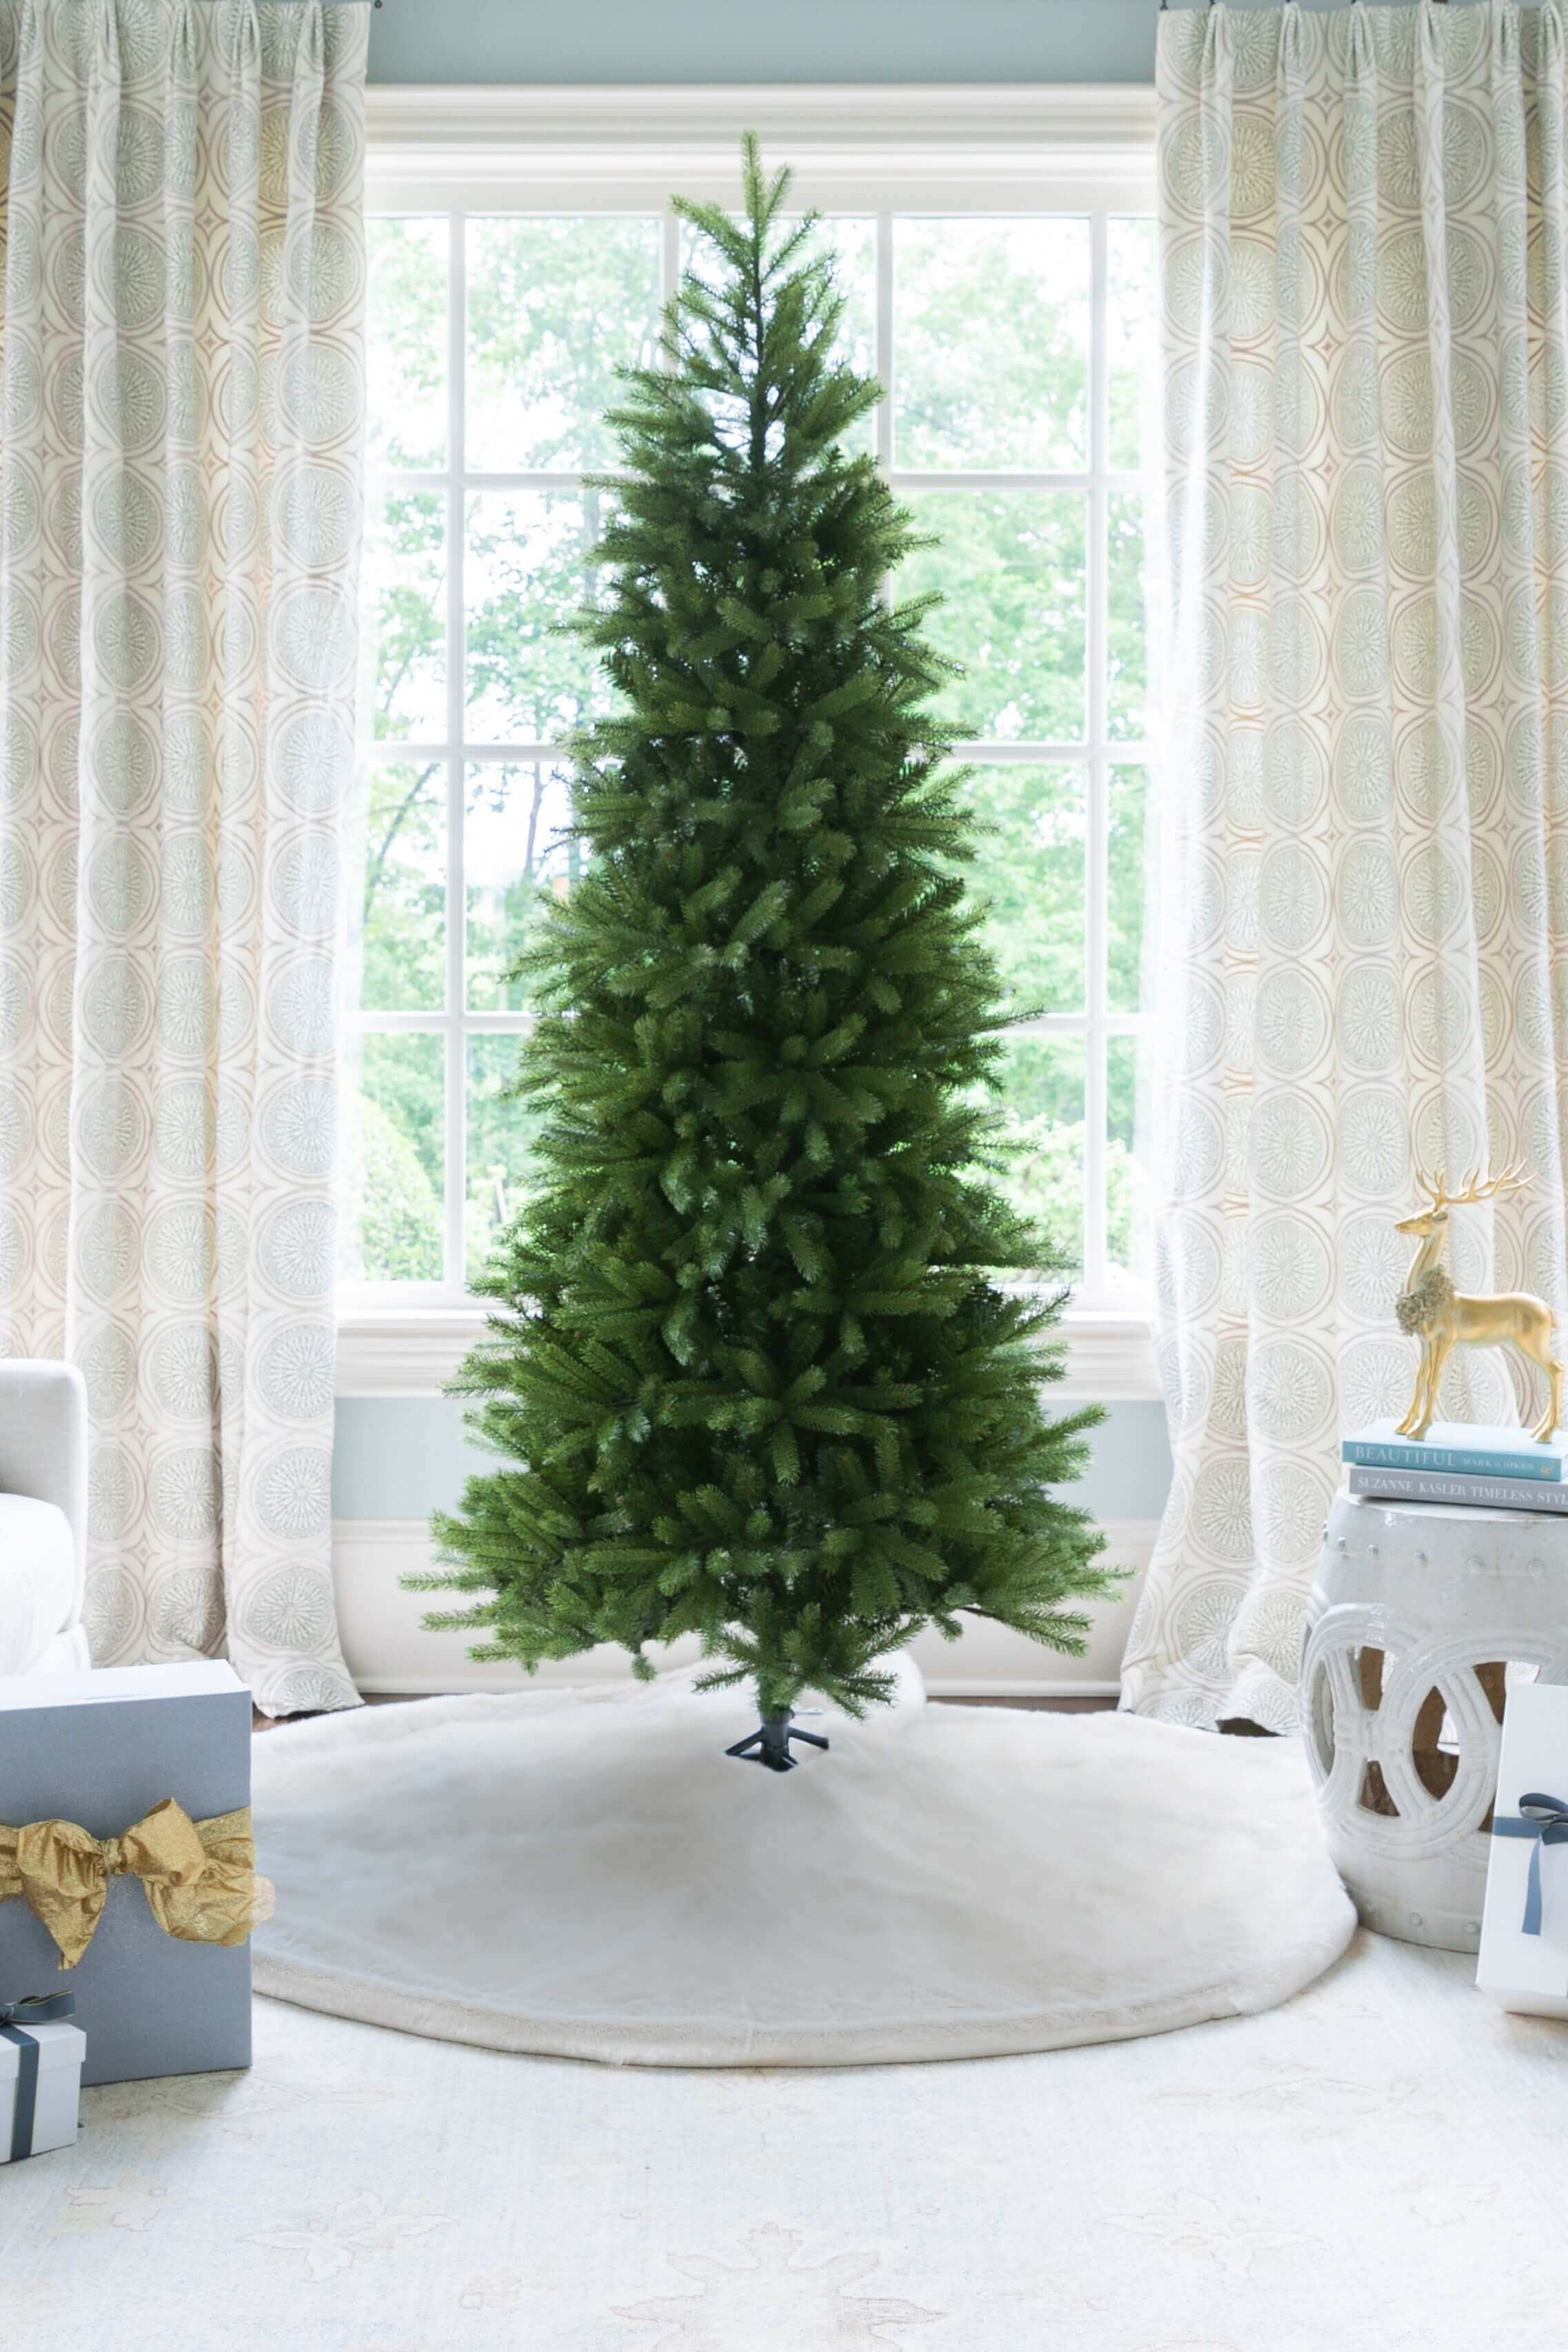 King of Christmas 9' King Fraser Fir Slim Quick-Shape Artificial Christmas Tree with 900 Dual Color Warm White & Multi-Color LED Lights